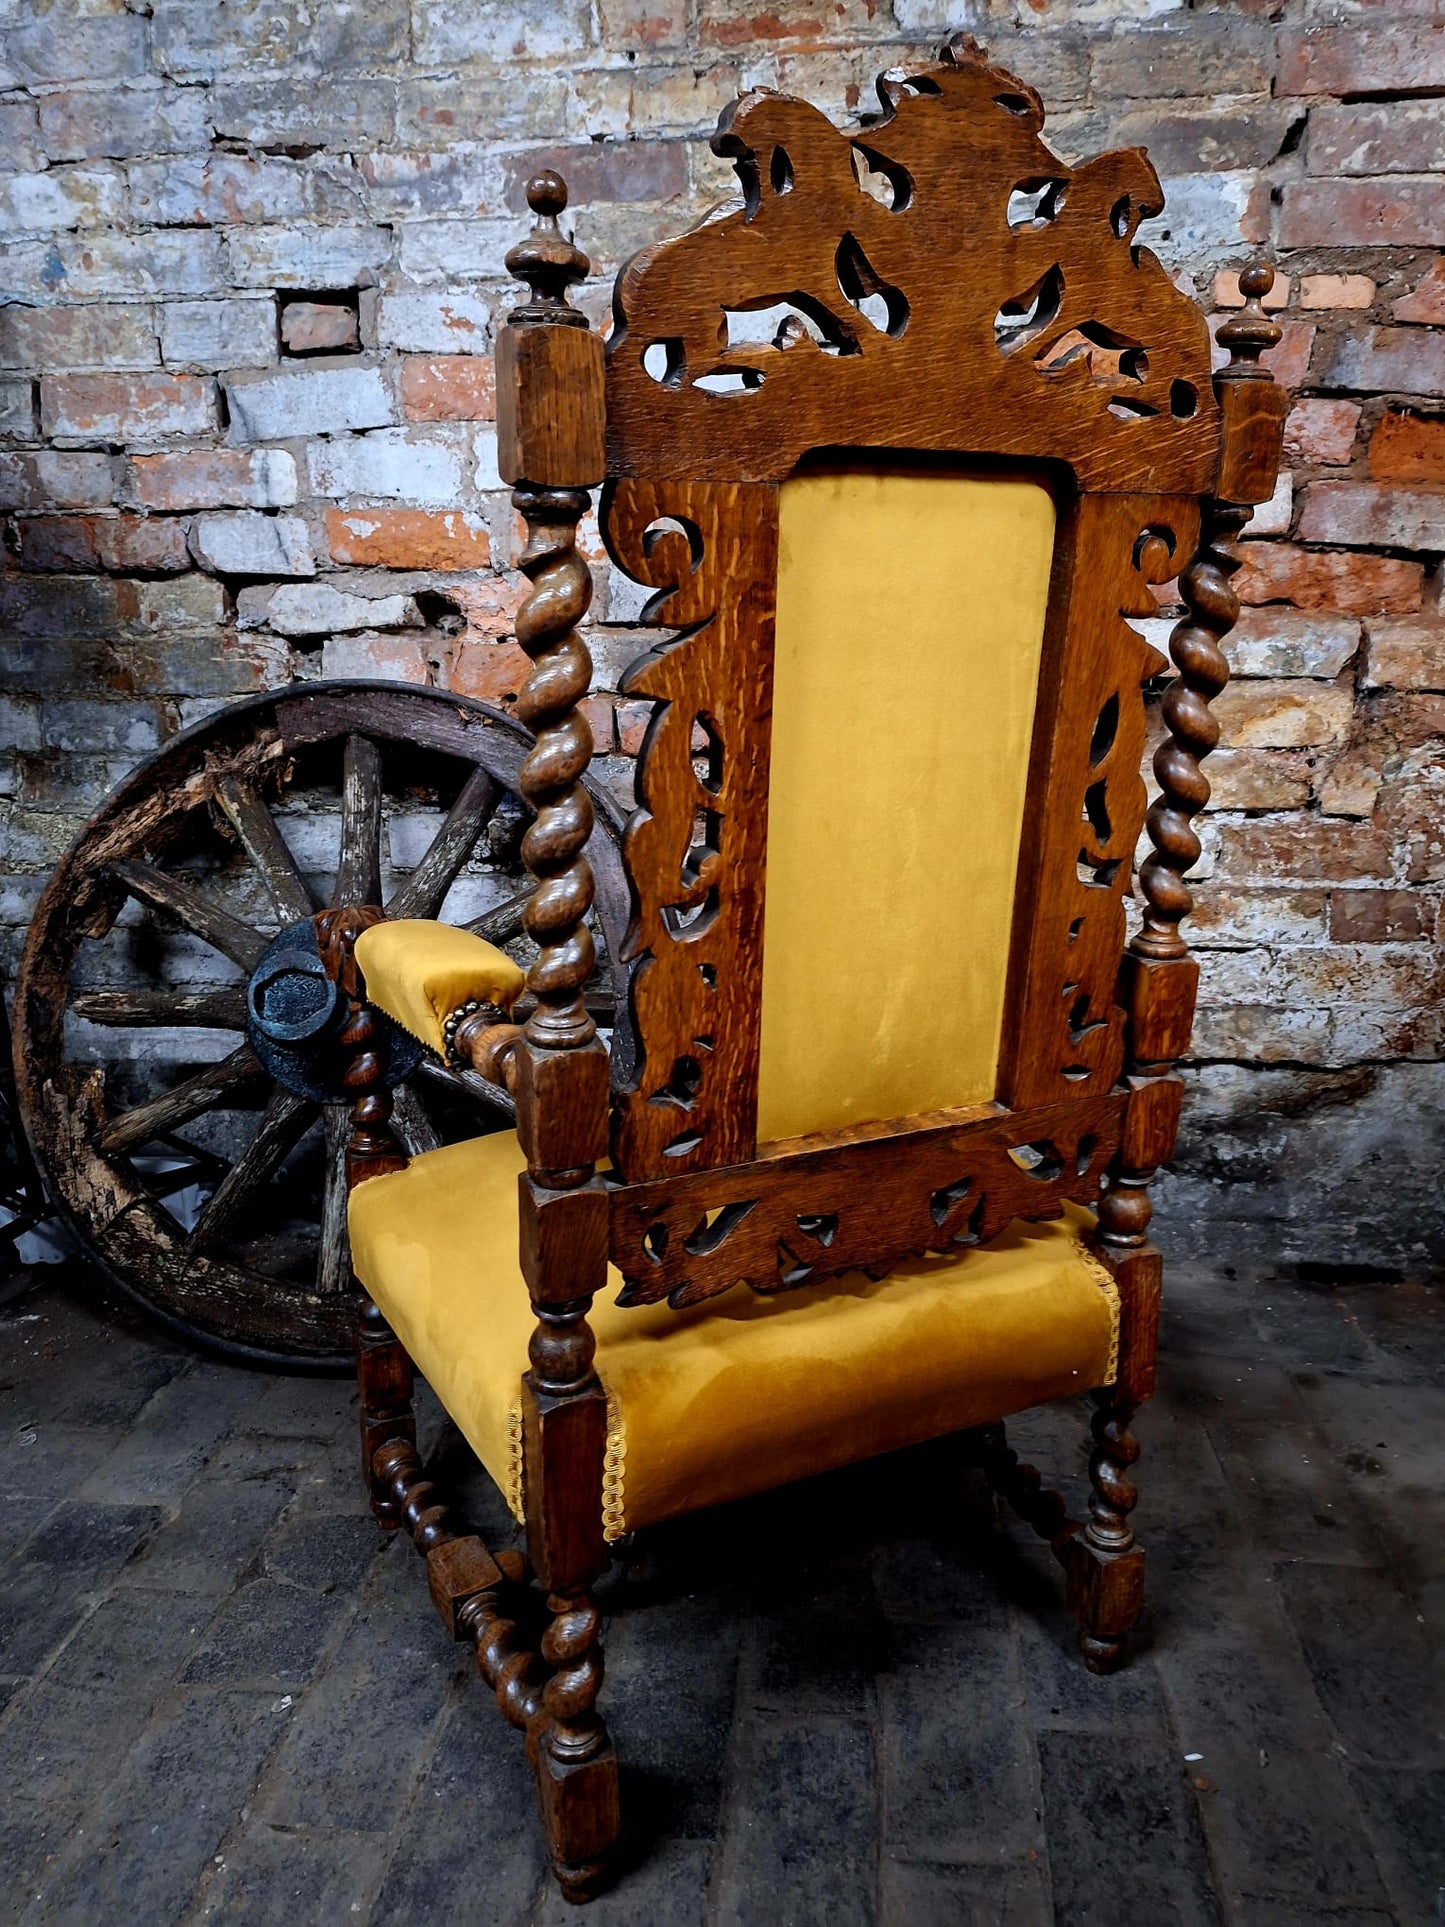 Antique Victorian Jacobean Revival Carved Throne Chair